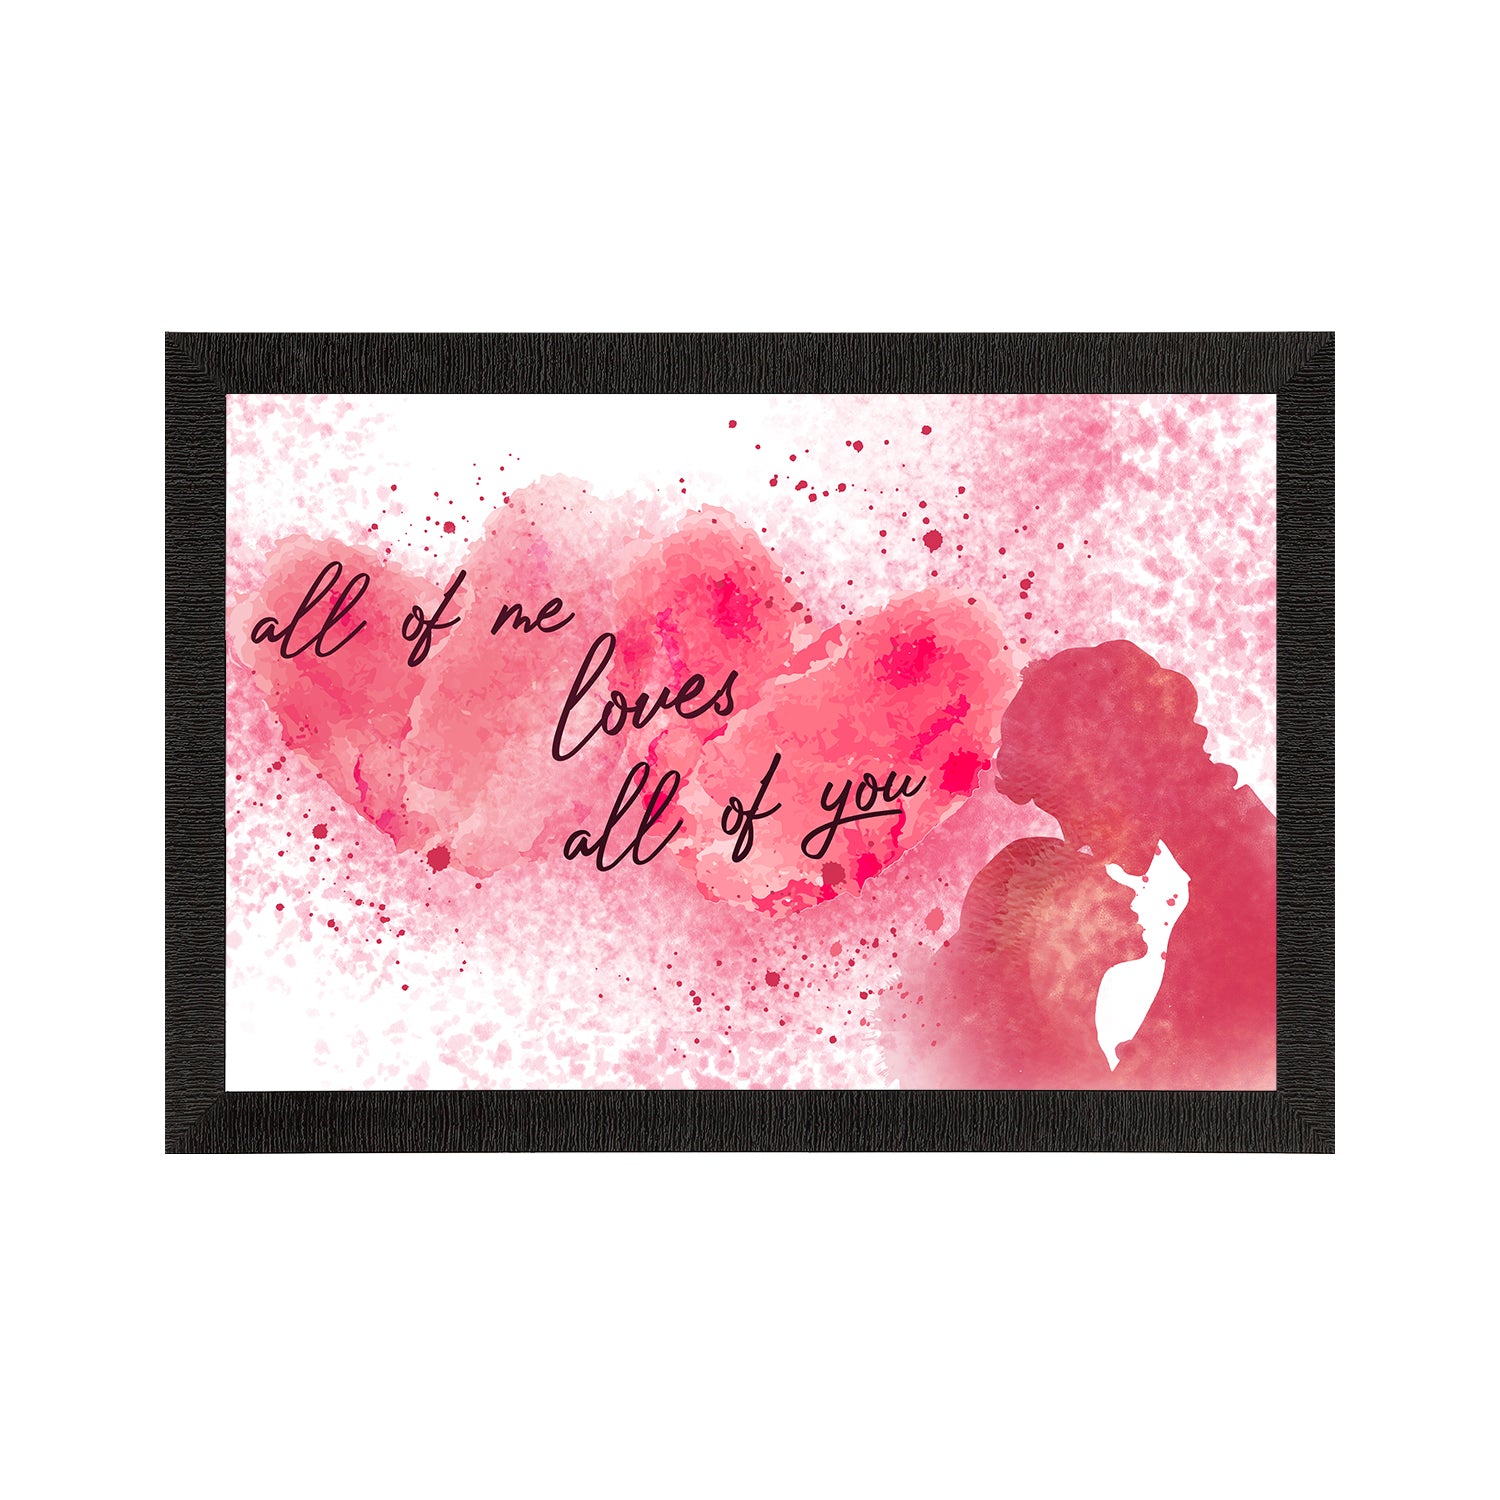 "All of me loves All of you" Love Theme Quote Satin Matt Texture UV Art Painting